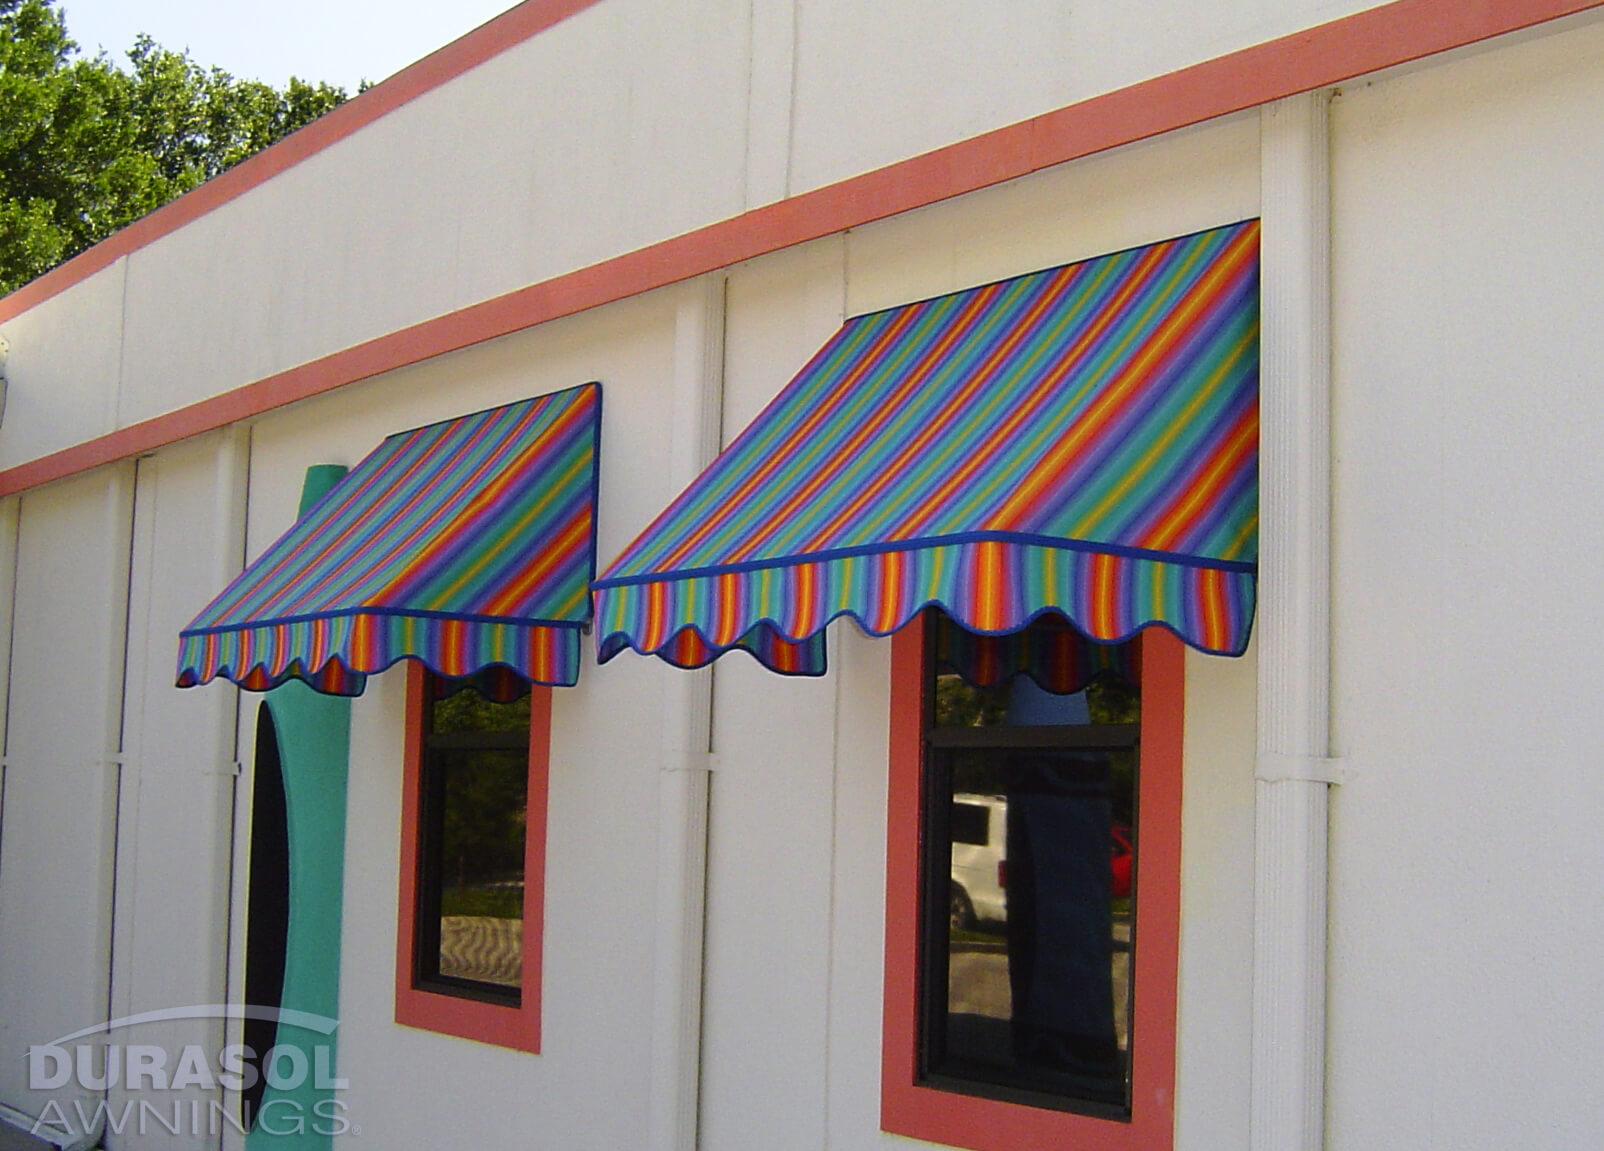 retractable-residential-canopy-window-awnings